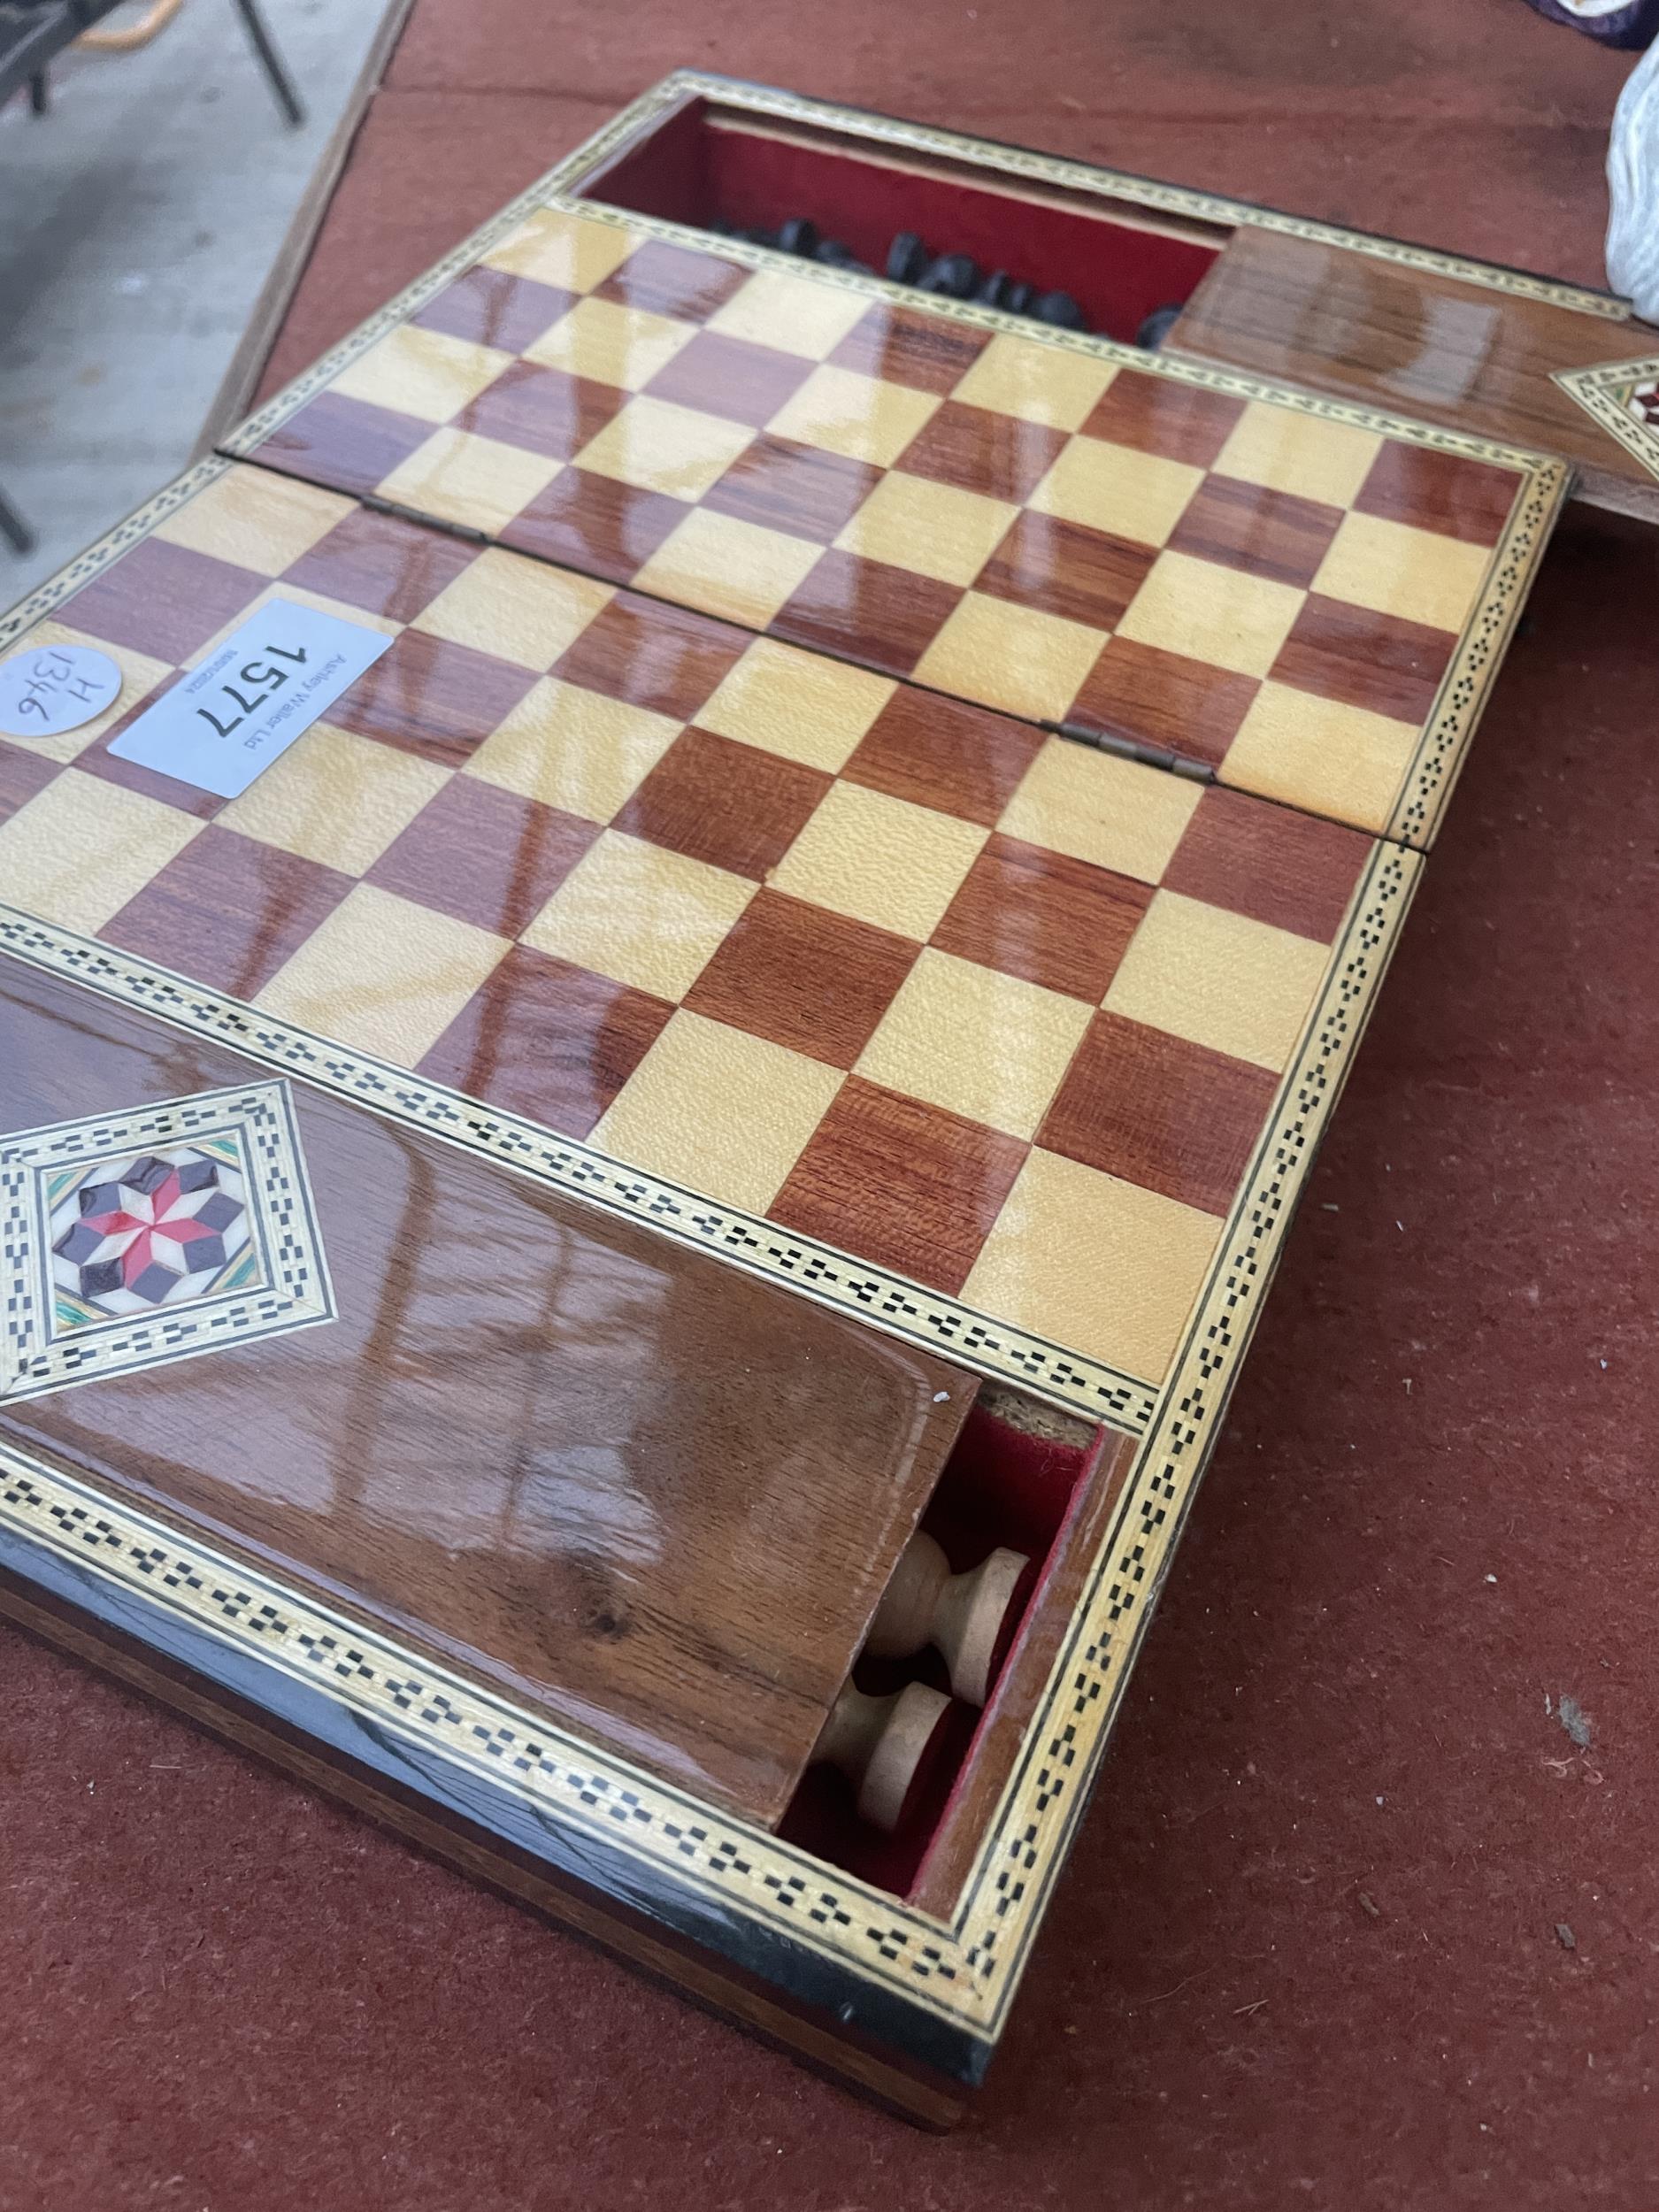 A VINTAGE WOODEN FOLDING TRAVEL CHESS BOARD AND CHESS PIECES - Image 4 of 6